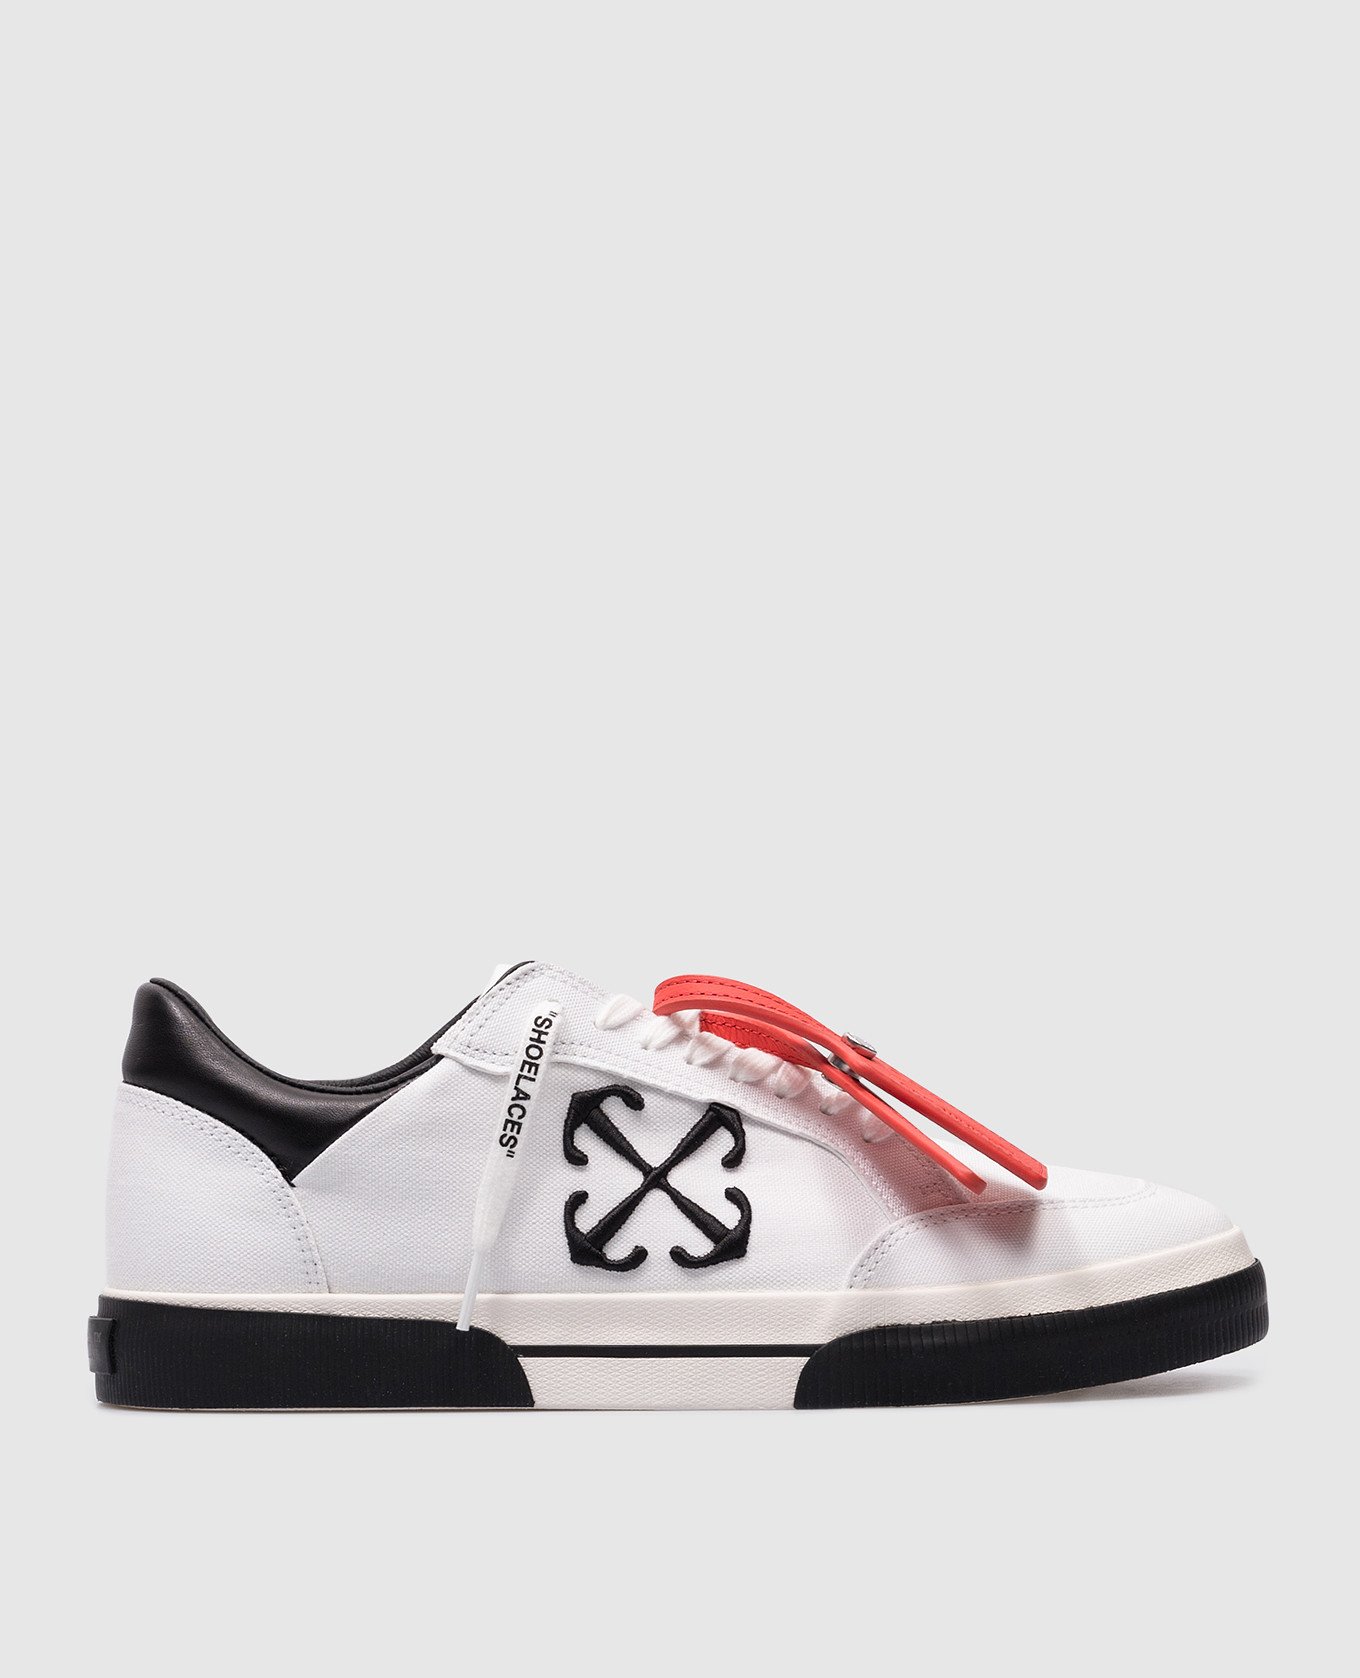 White sneakers with Arrow logo embroidery